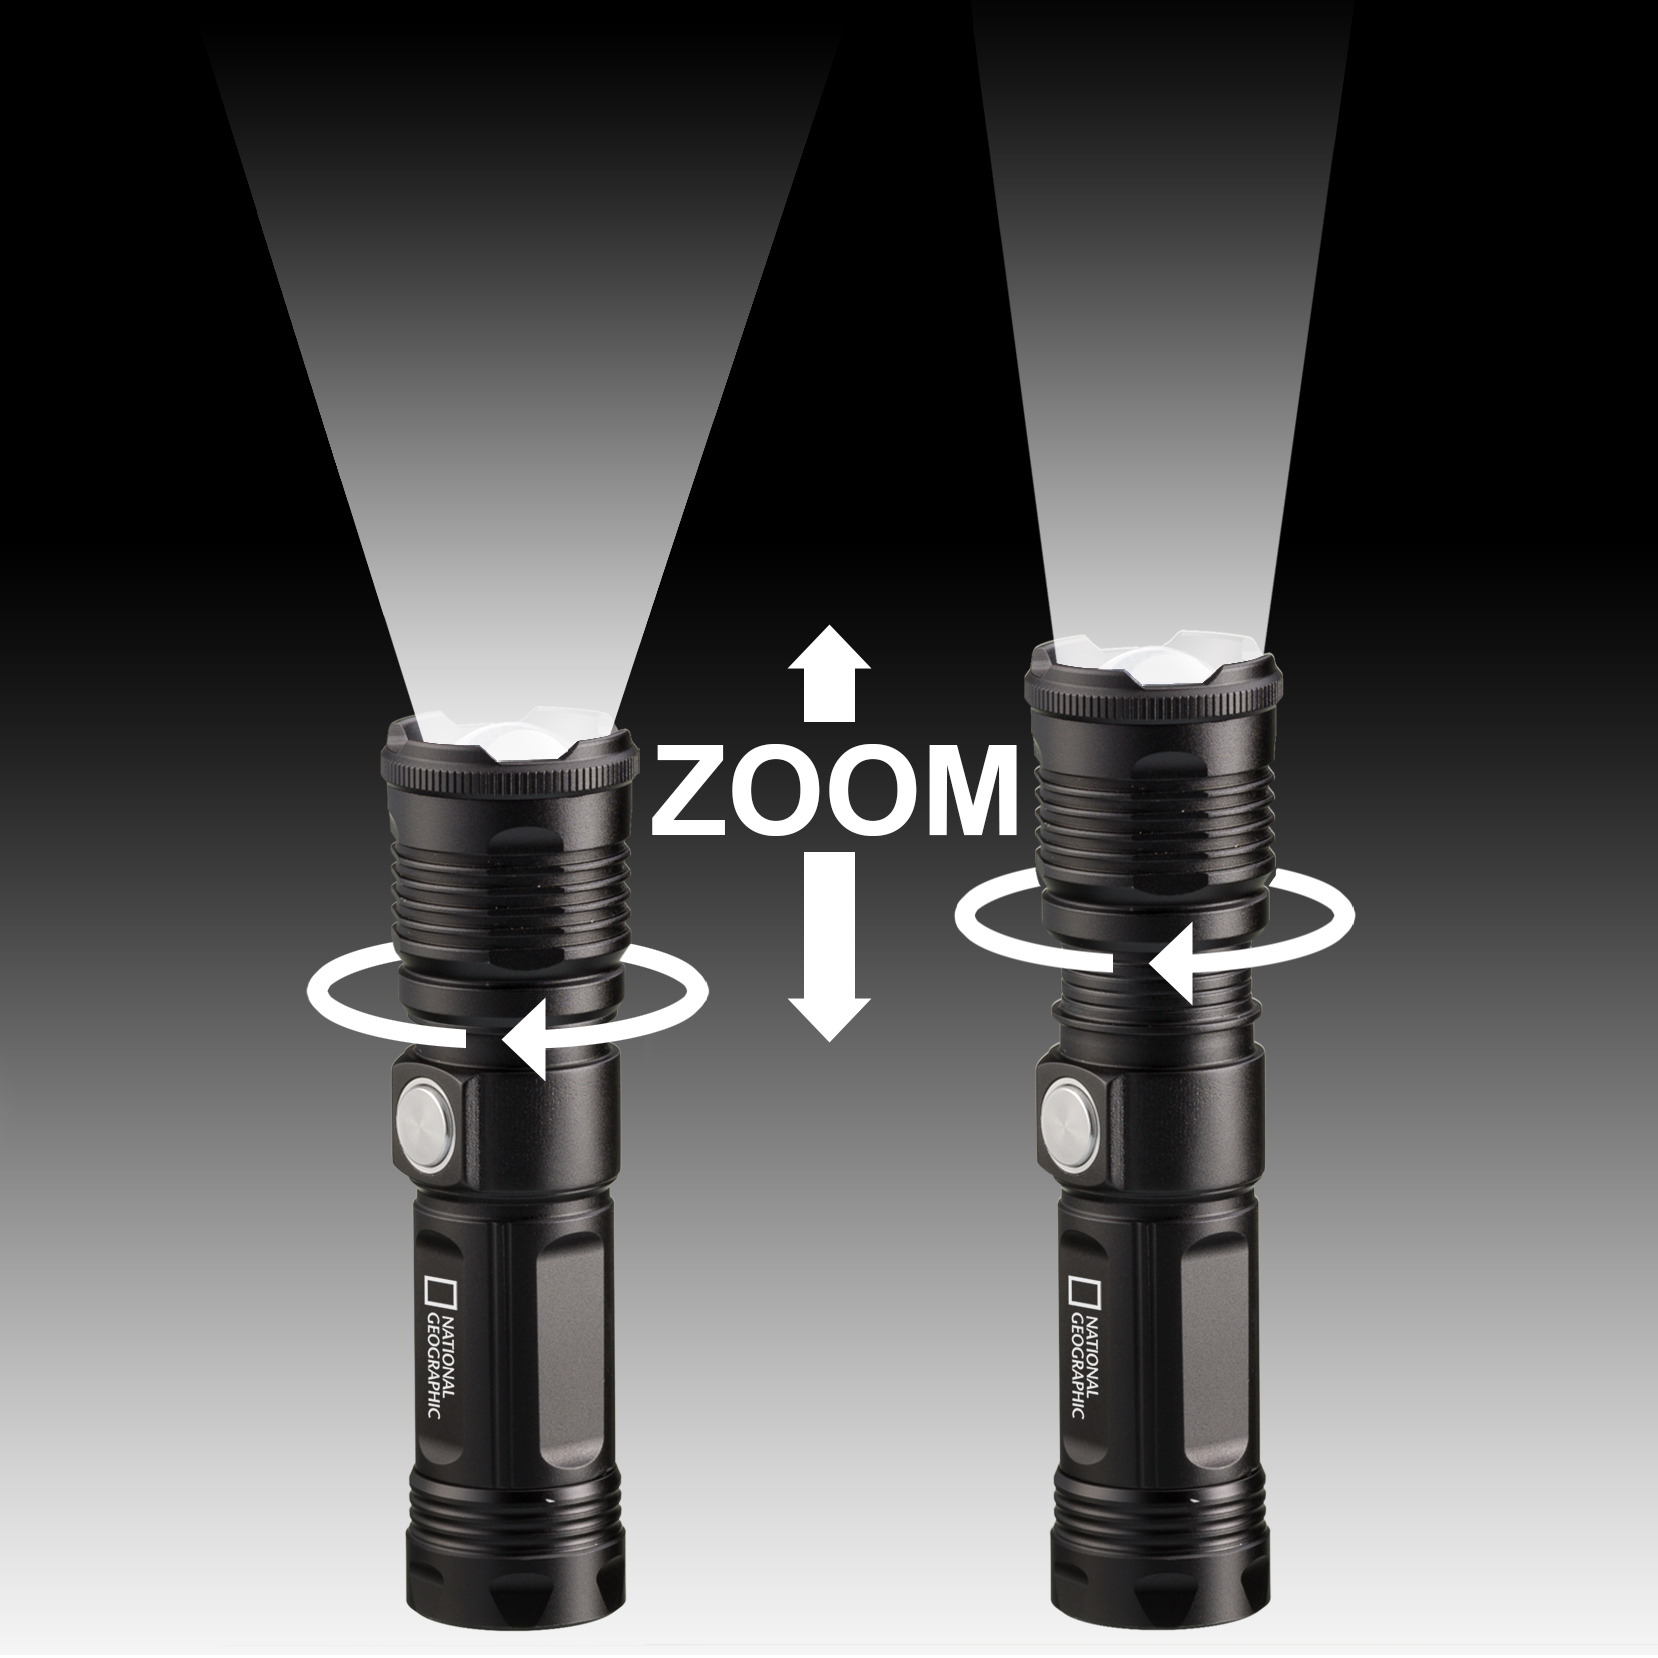 Torcia con zoom LED ILUMINOS 1000 NATIONAL GEOGRAPHIC 1000 lm